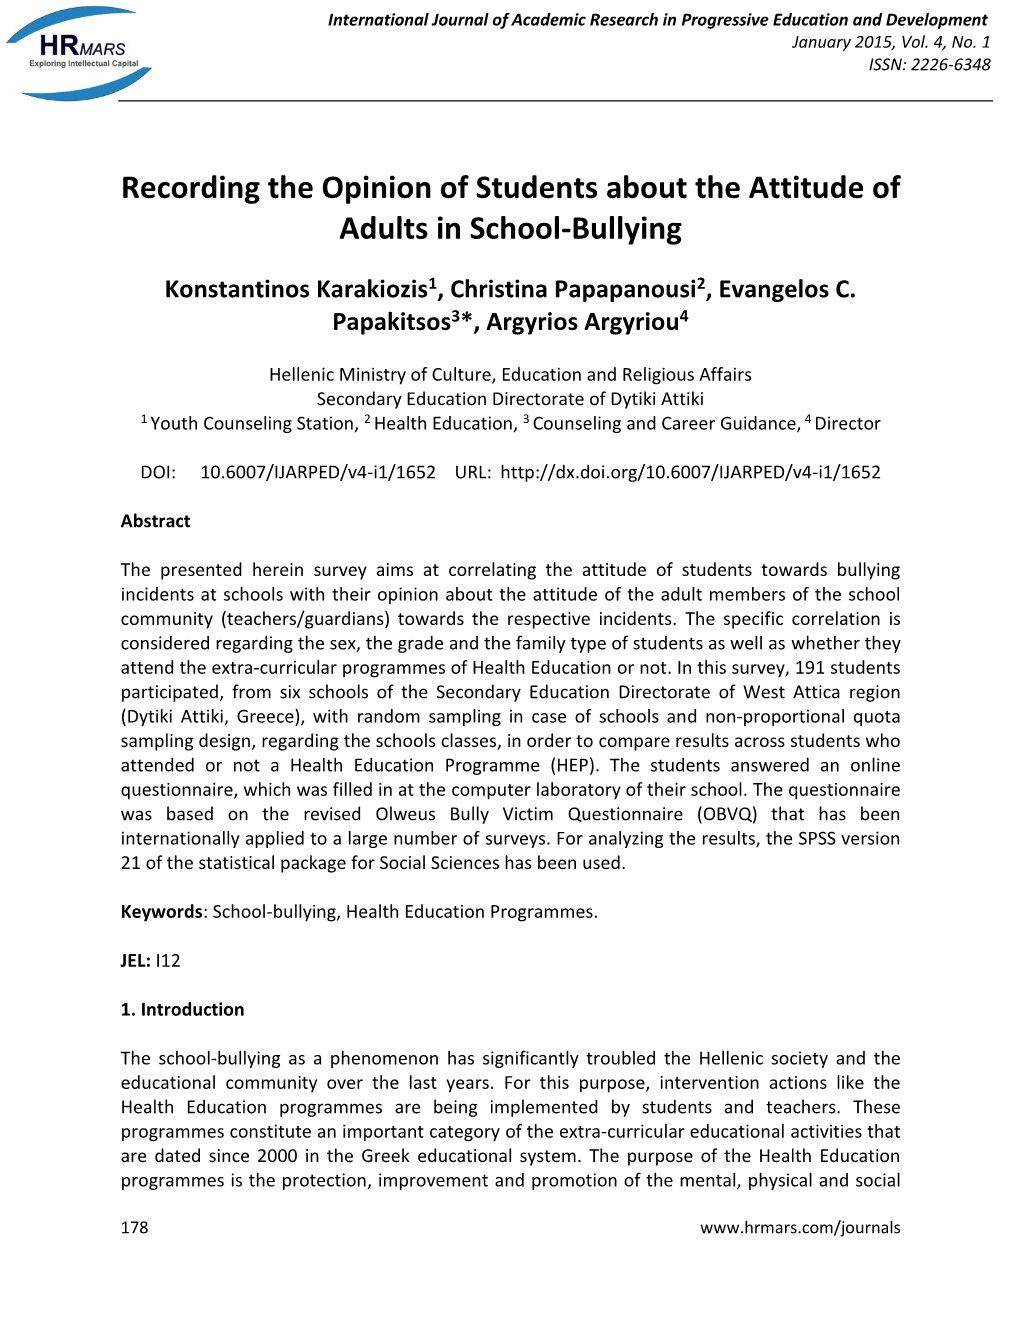 Recording the Opinion of Students About the Attitude of Adults in School-Bullying